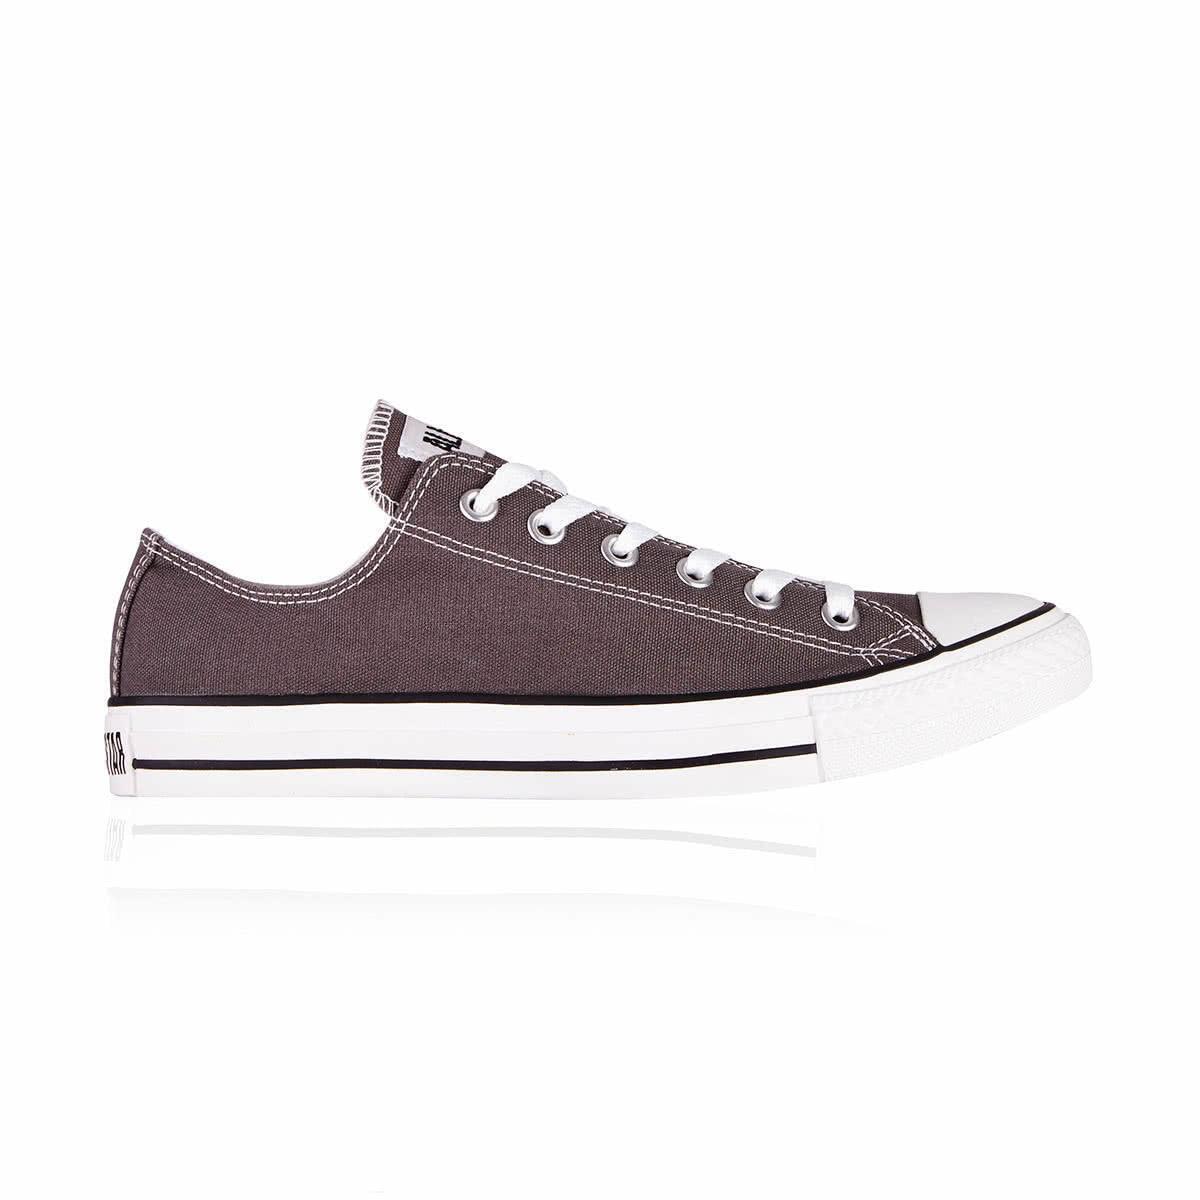 Converse - Chuck Taylor All Star Low Unisex Shoes - Mens US 8/Womens US 10 - Charcoal